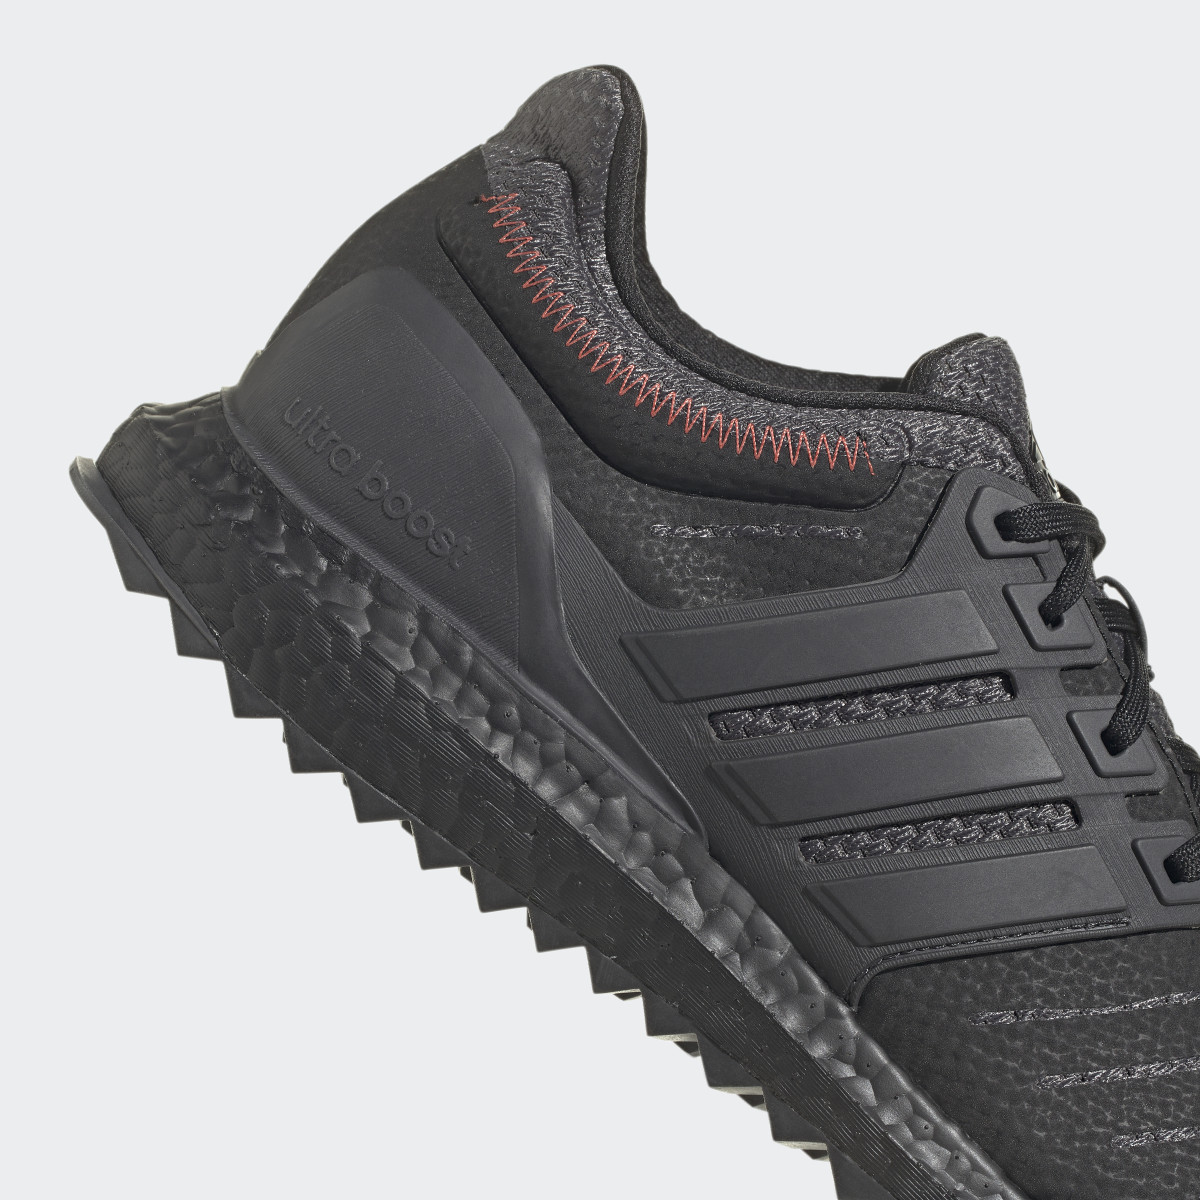 Adidas Chaussure Ultraboost DNA XXII Lifestyle Running Sportswear Capsule Collection. 8